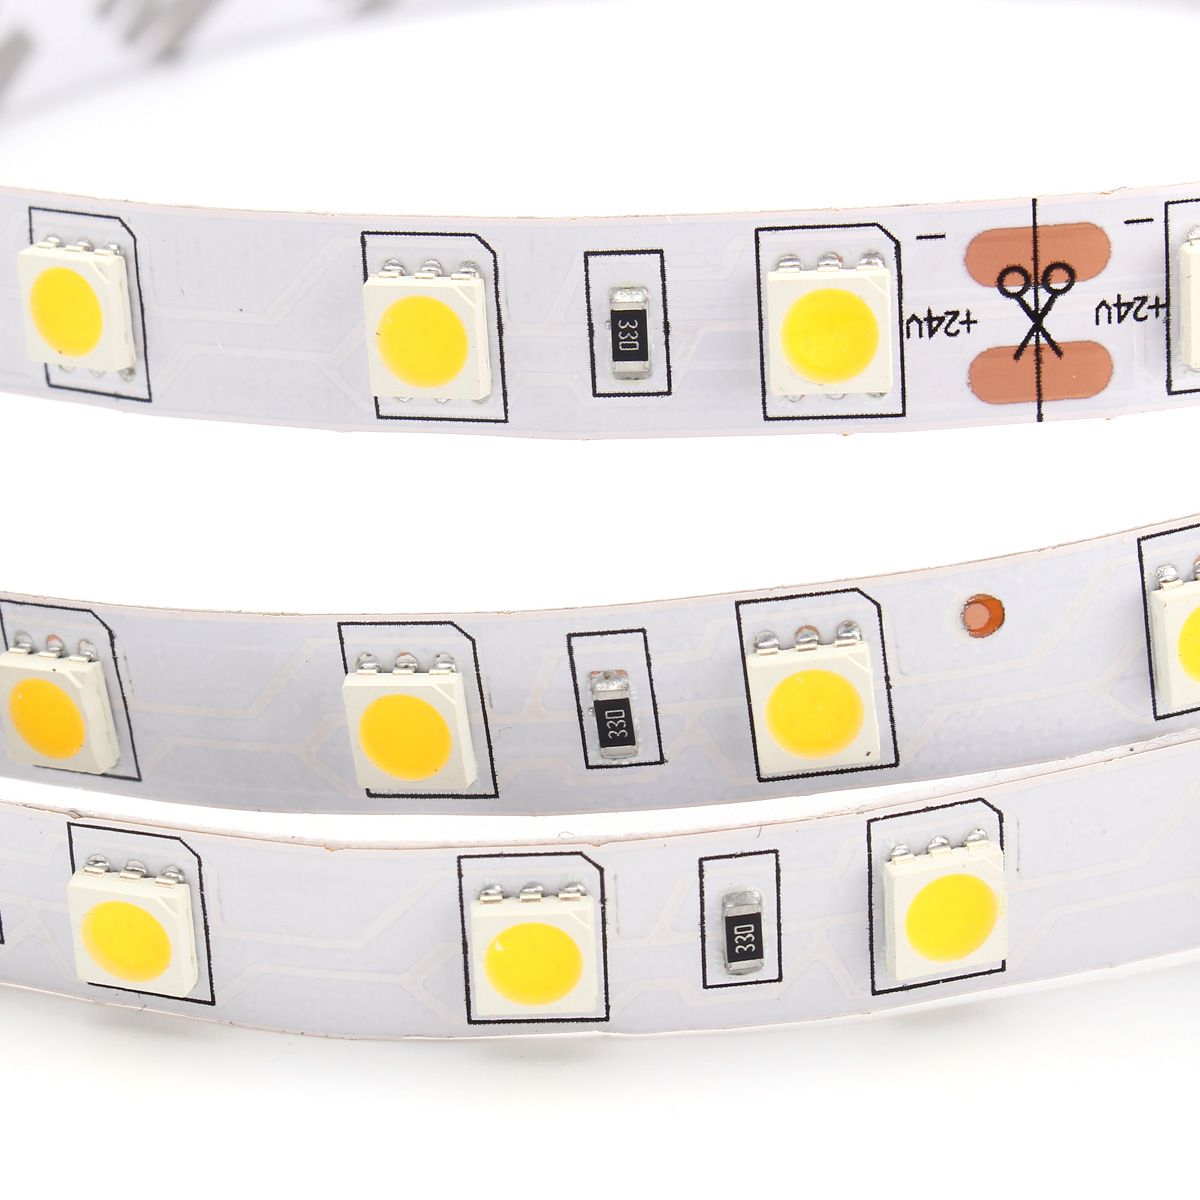 5M-72W-SMD5050-Non-Waterproof-300LEDs-Flexible-Strip-Tape-Light-for-Home-Decoration-DC24V-1178146